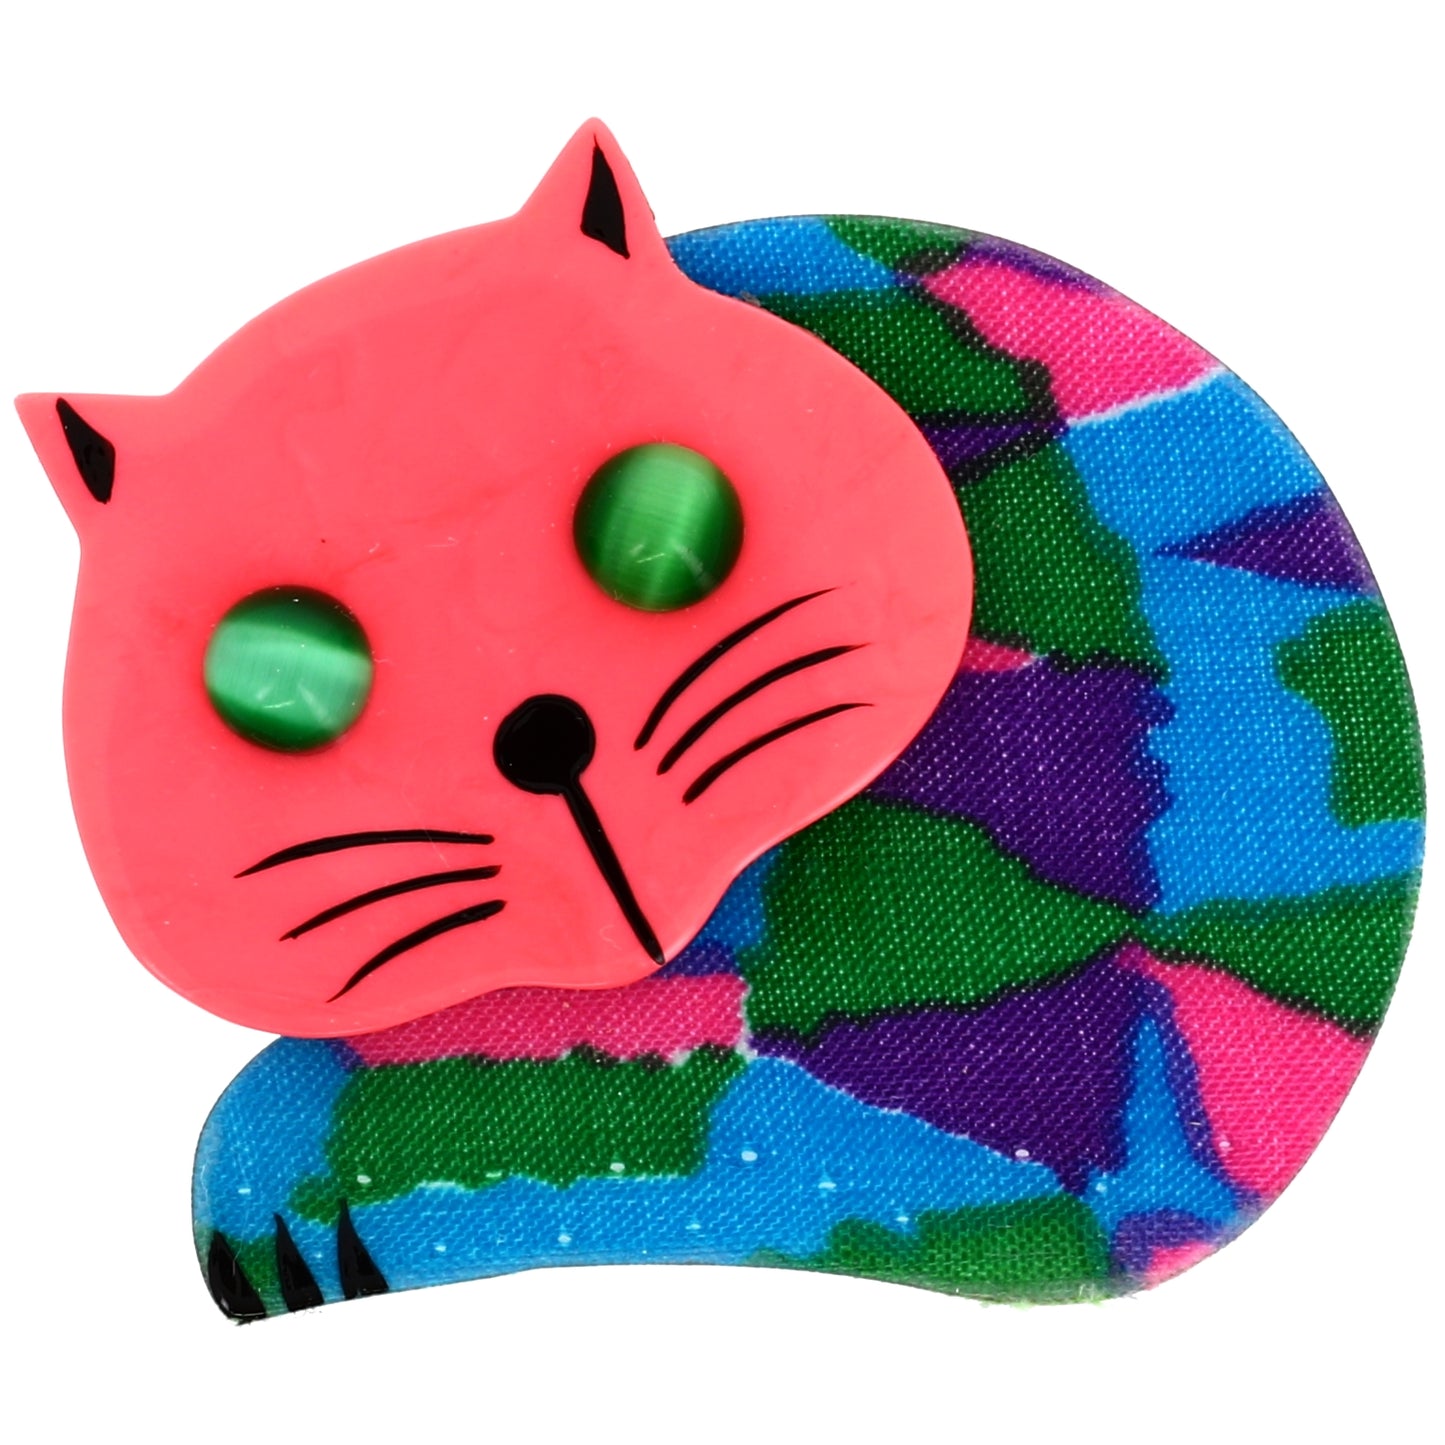 Chat Roudoudou pink brooch and printed dress